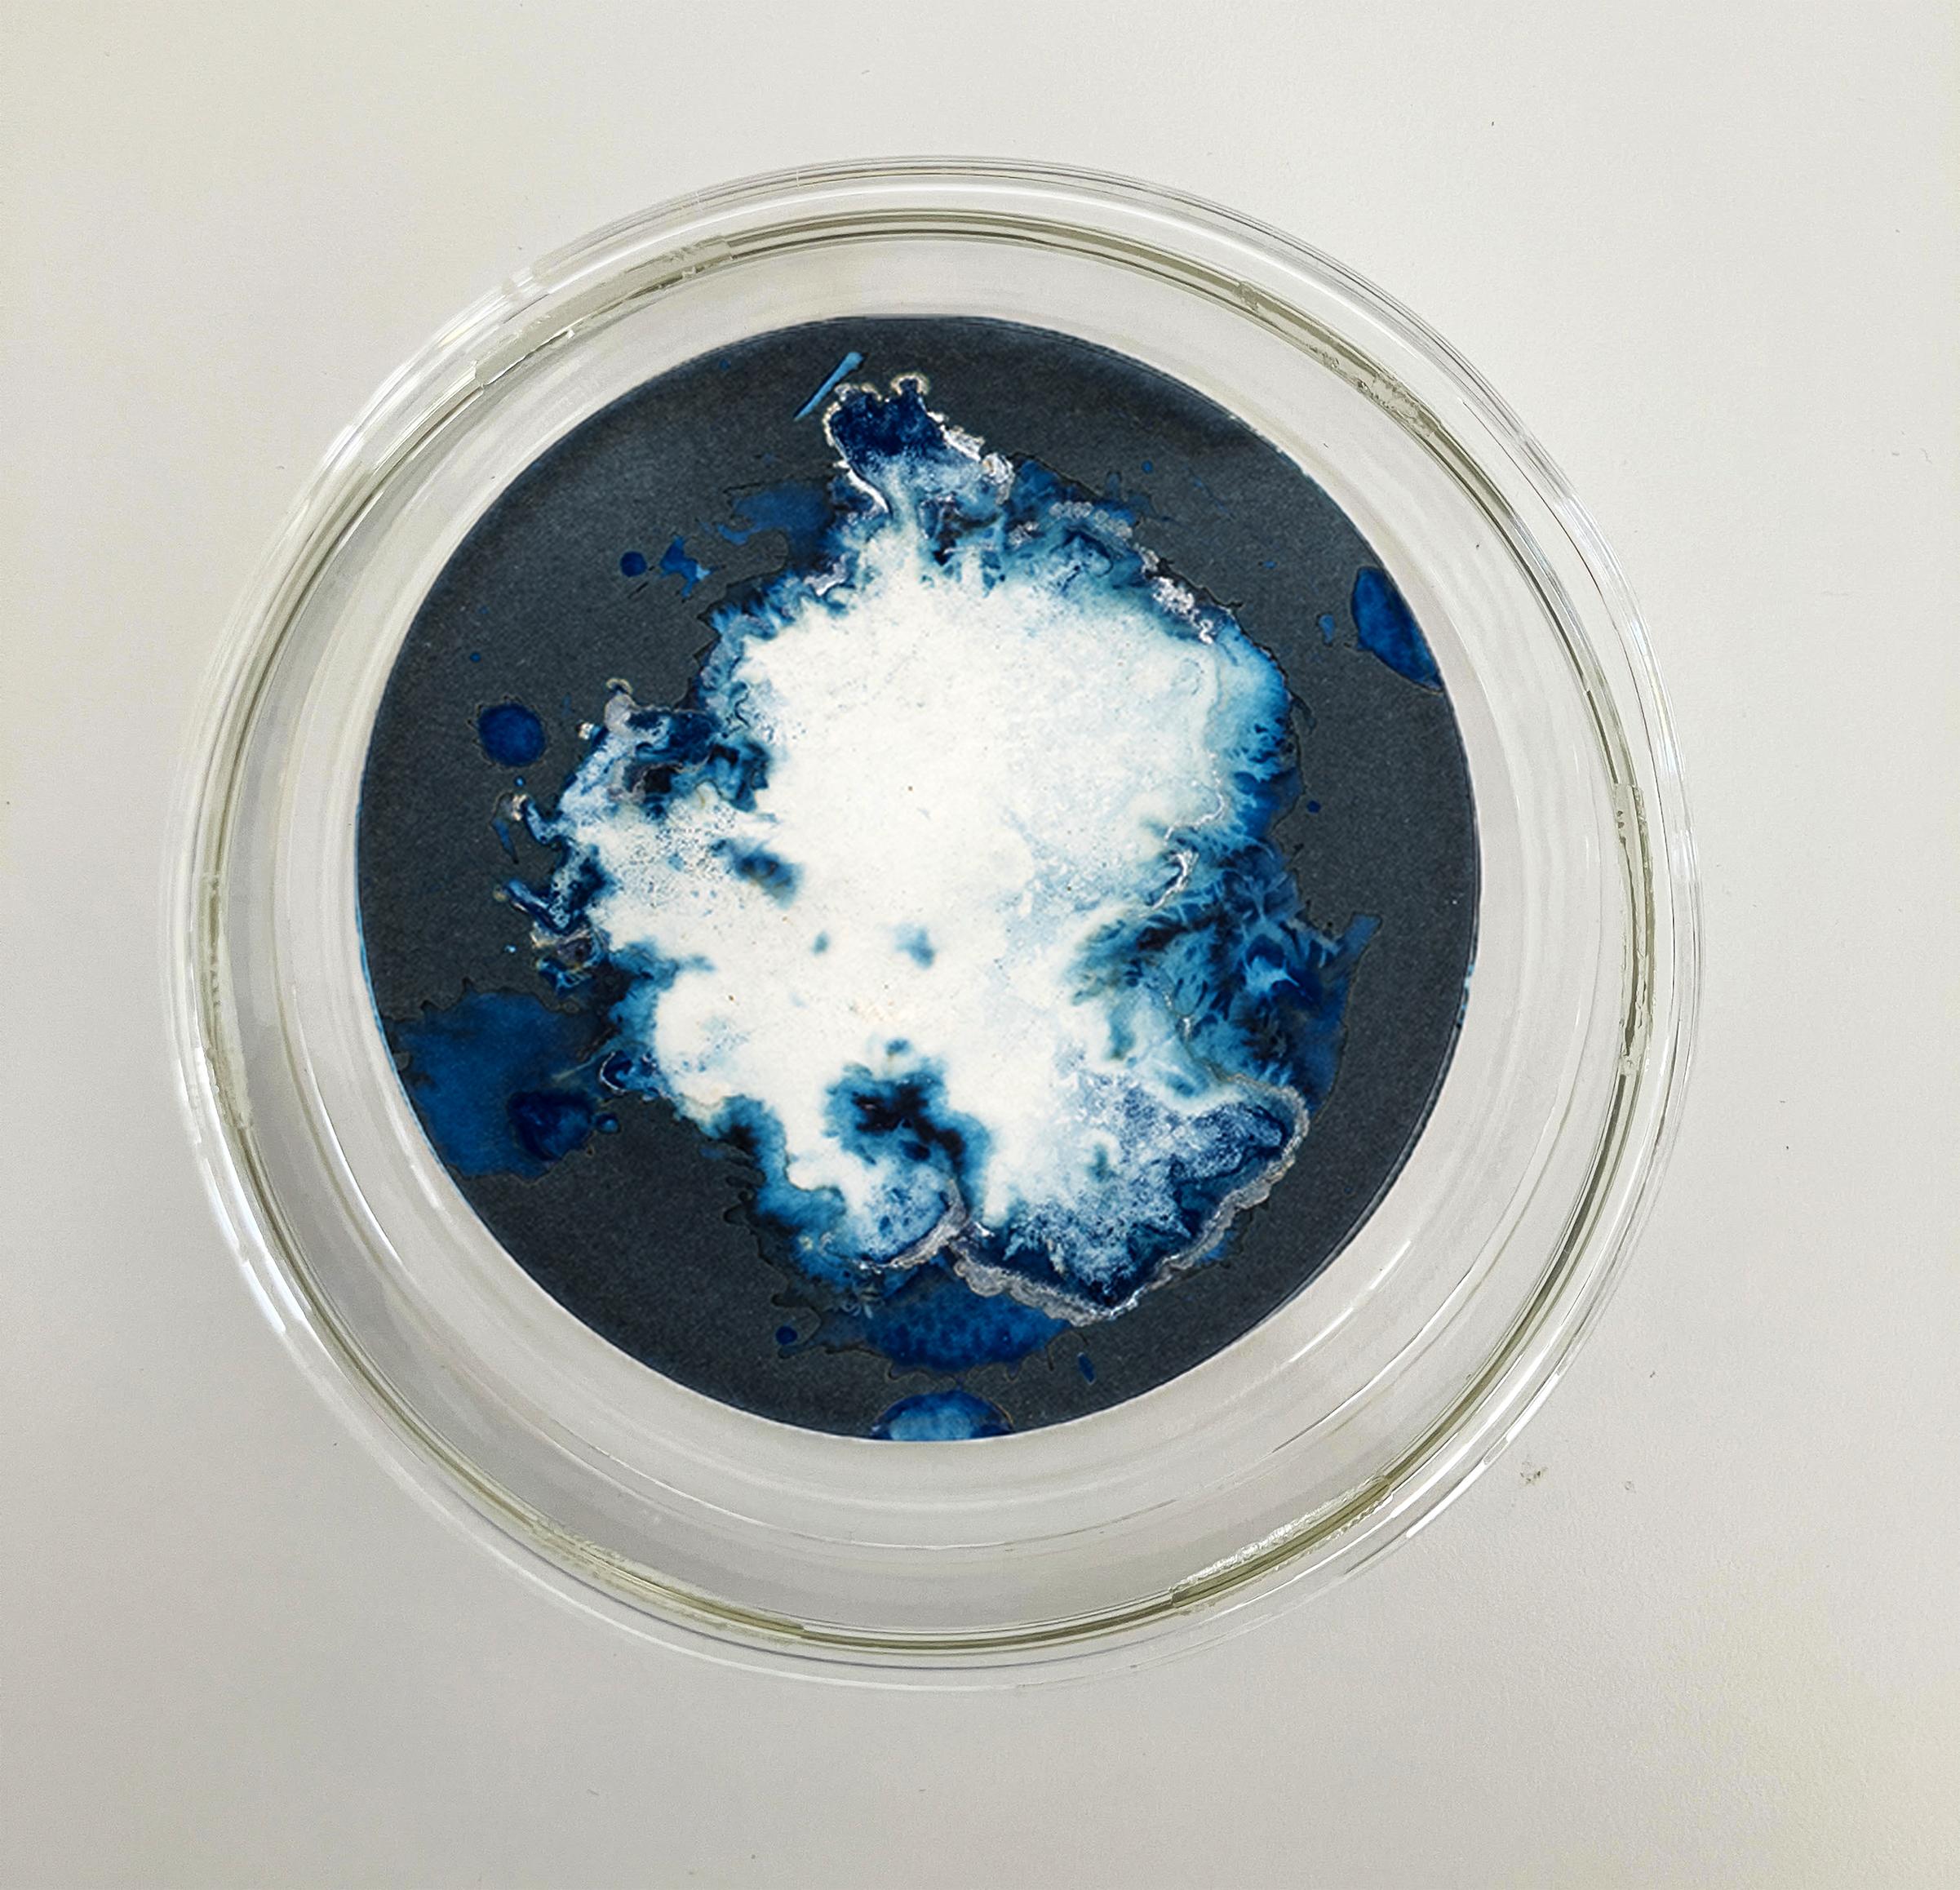 Algas 75, 83 Y 26. Cyanotype photograhs mounted in high resistance glass dish - Abstract Photograph by Paola Davila